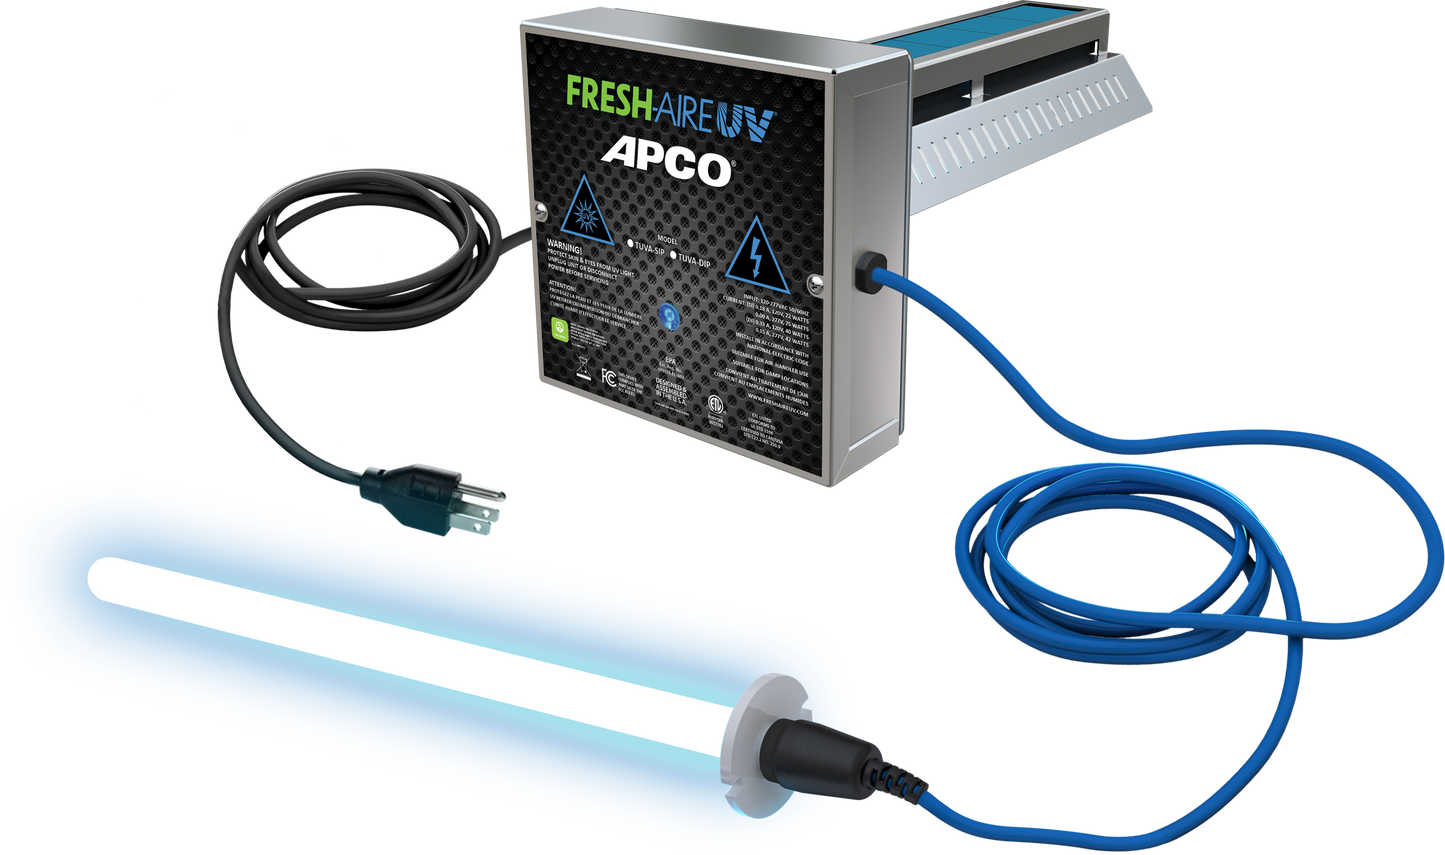 Fresh-Aire TUV-APCO-DI2P - Dual In-Duct Purifier w/Carbon Matrix & 2nd lamp with 120V Plug